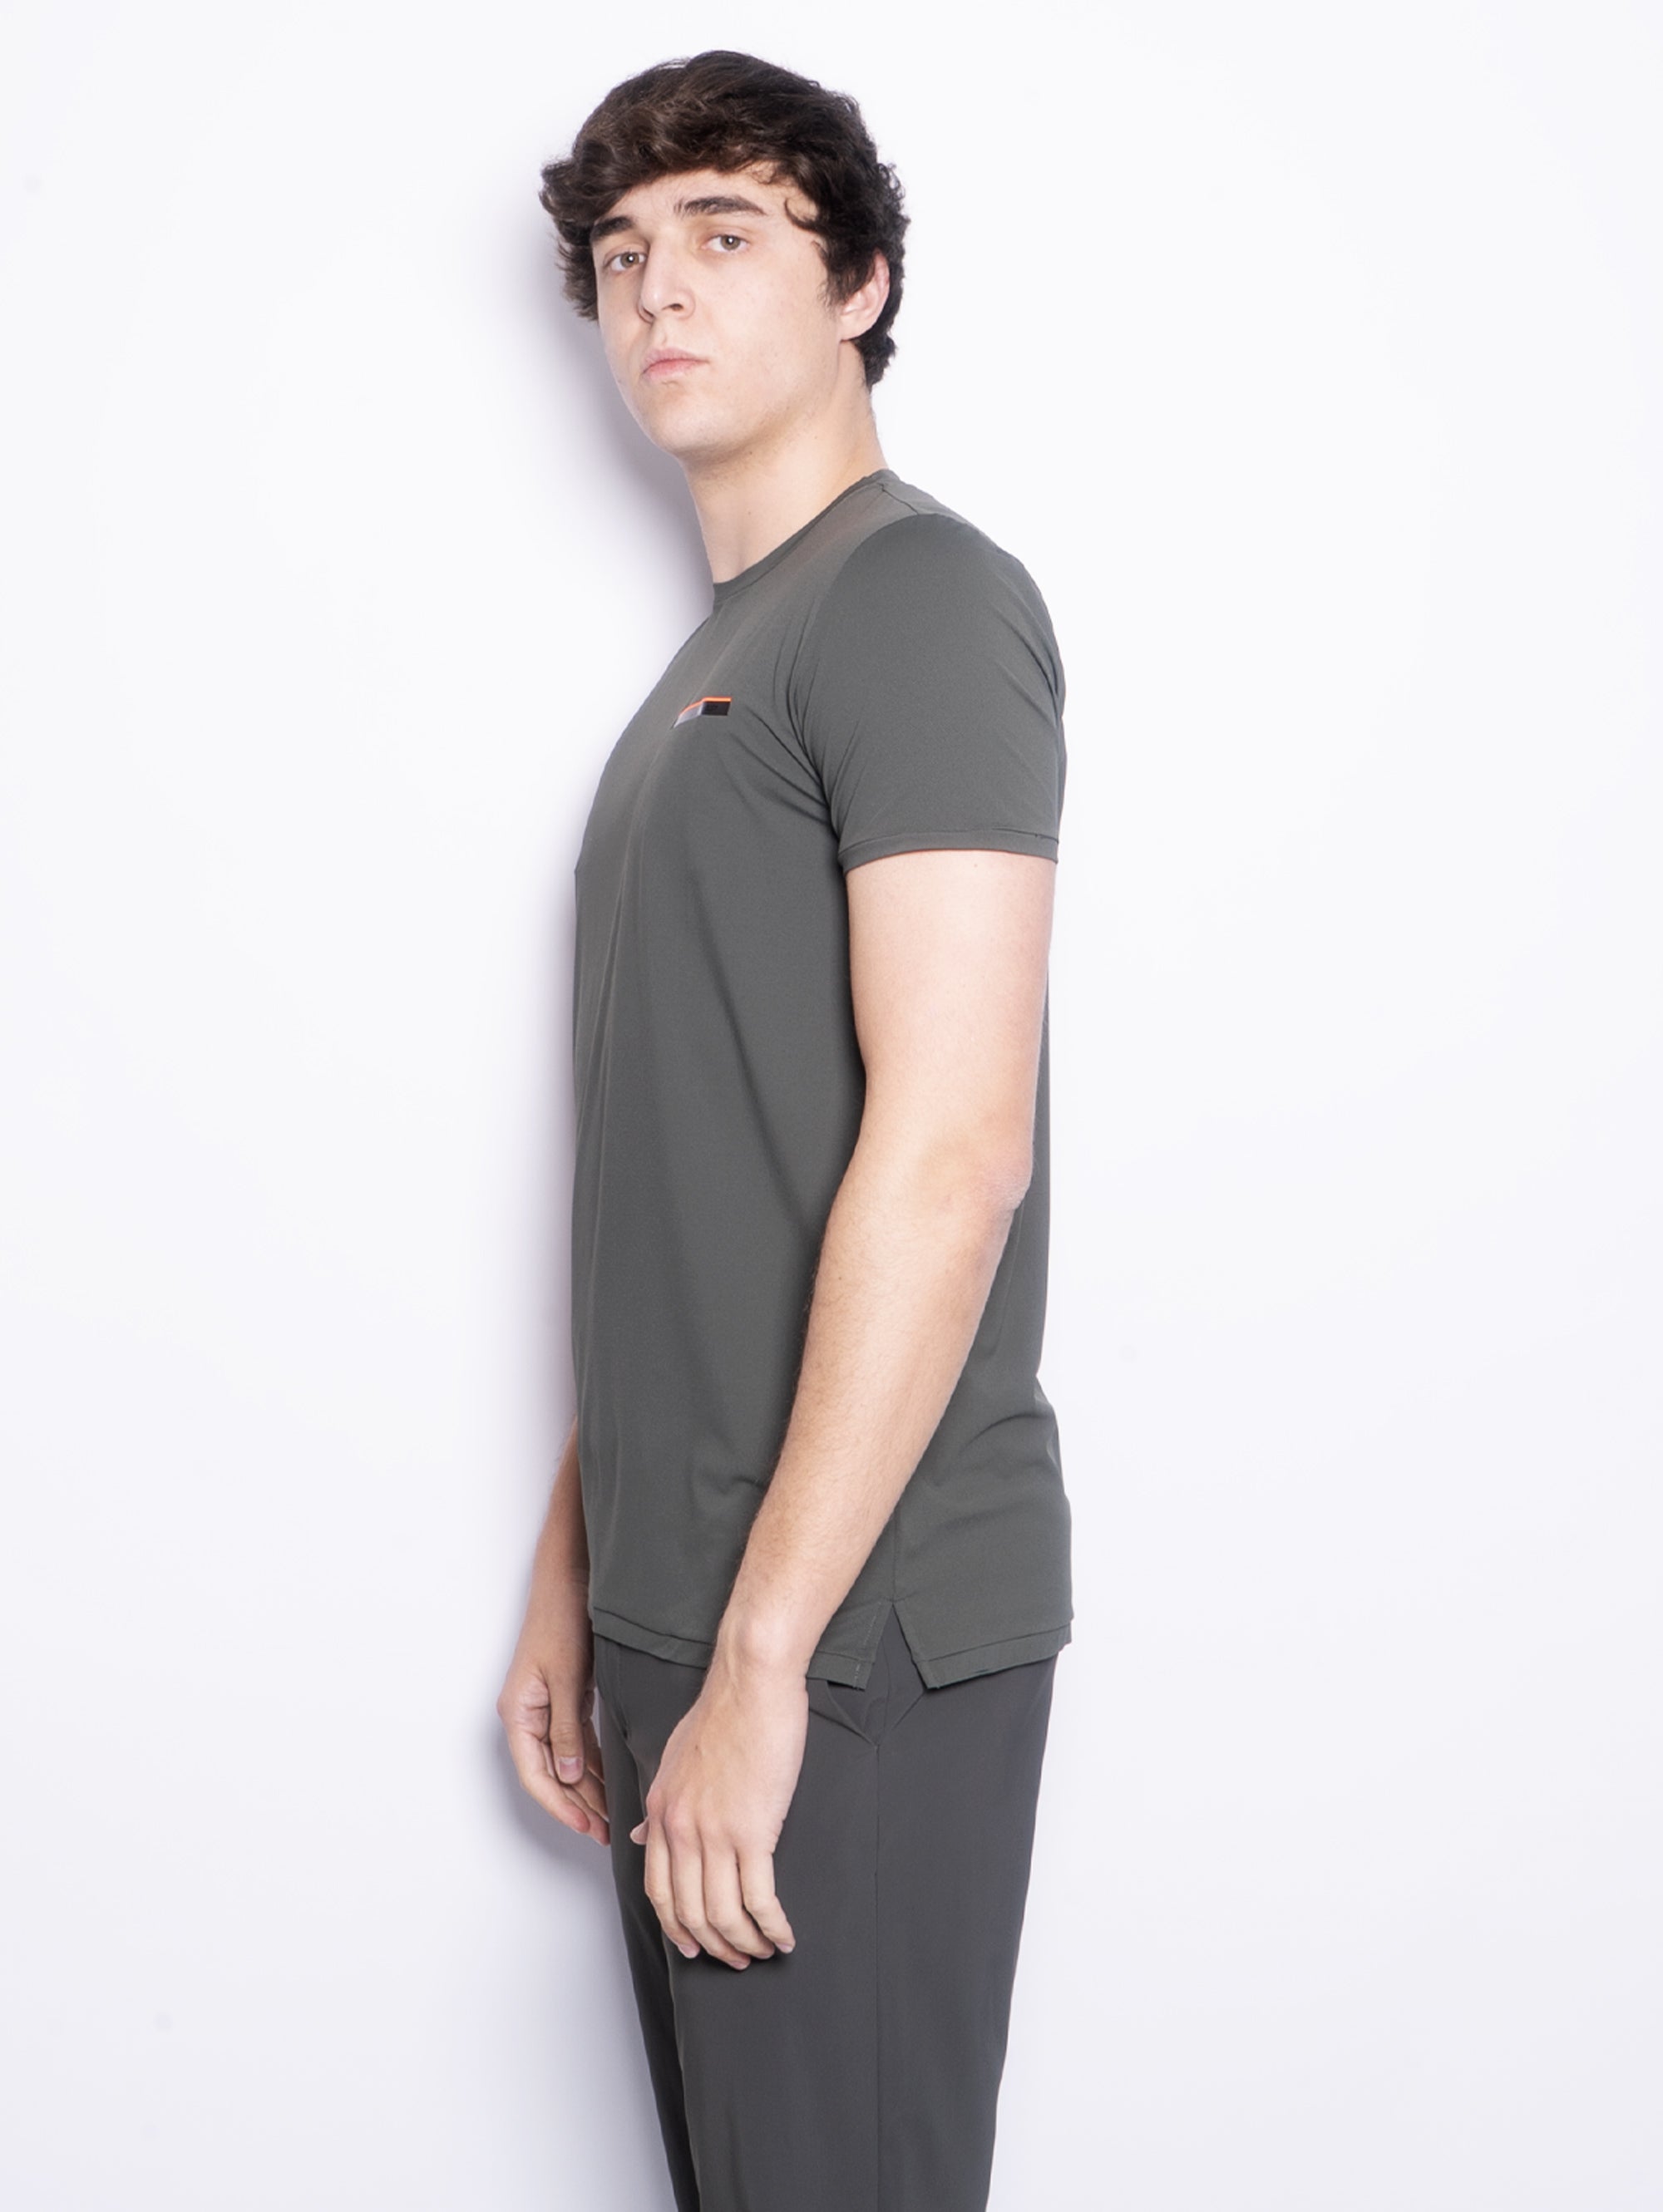 T-shirt in breathable fabric with Bosco pocket